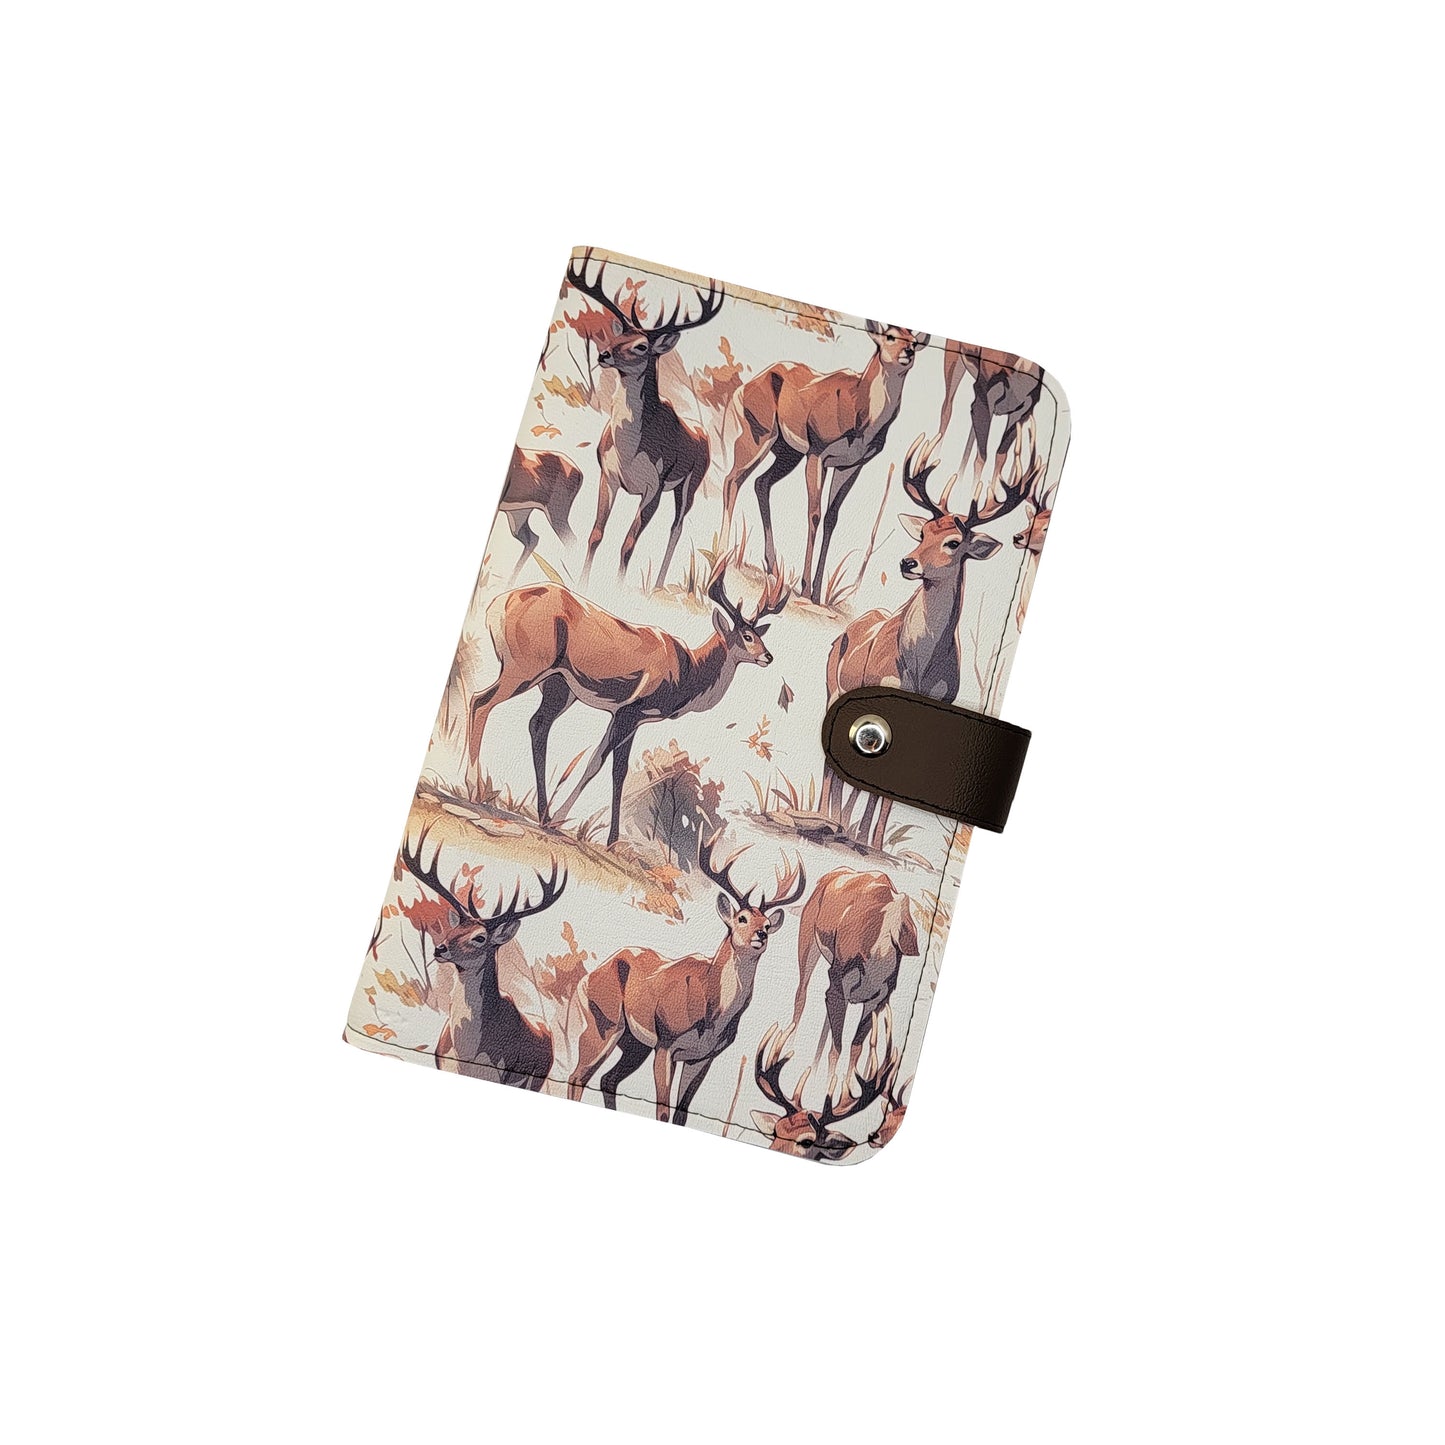 *Less than Perfect* Deer- Notebook & Cover